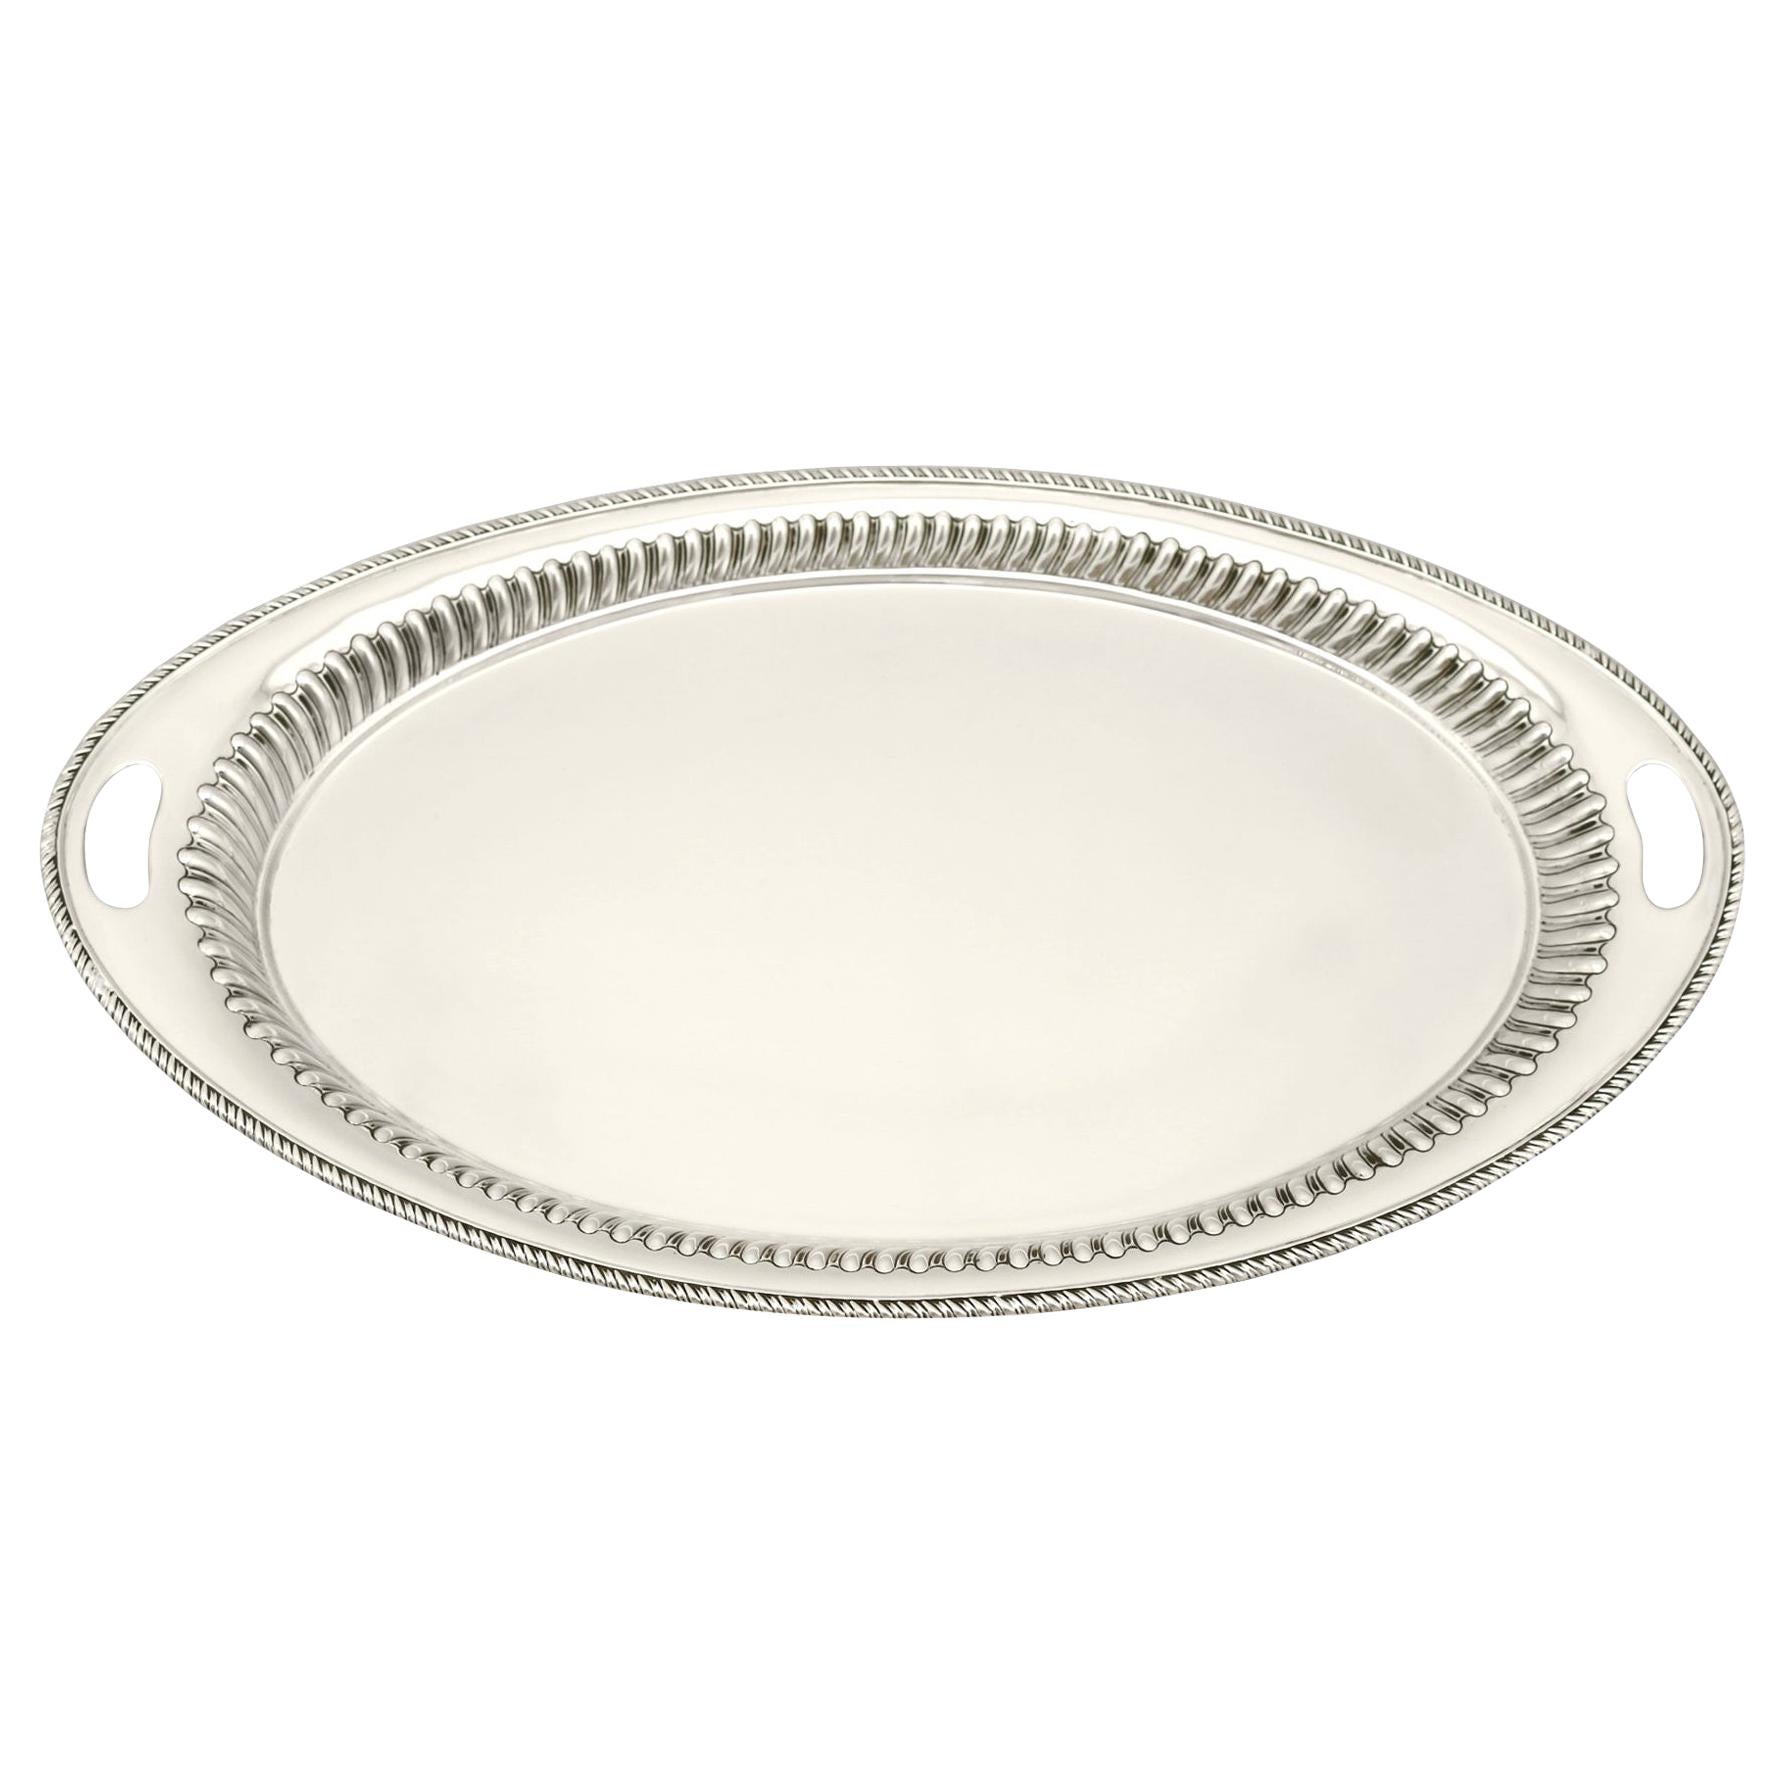 1892 Antique Victorian Sterling Silver Tray